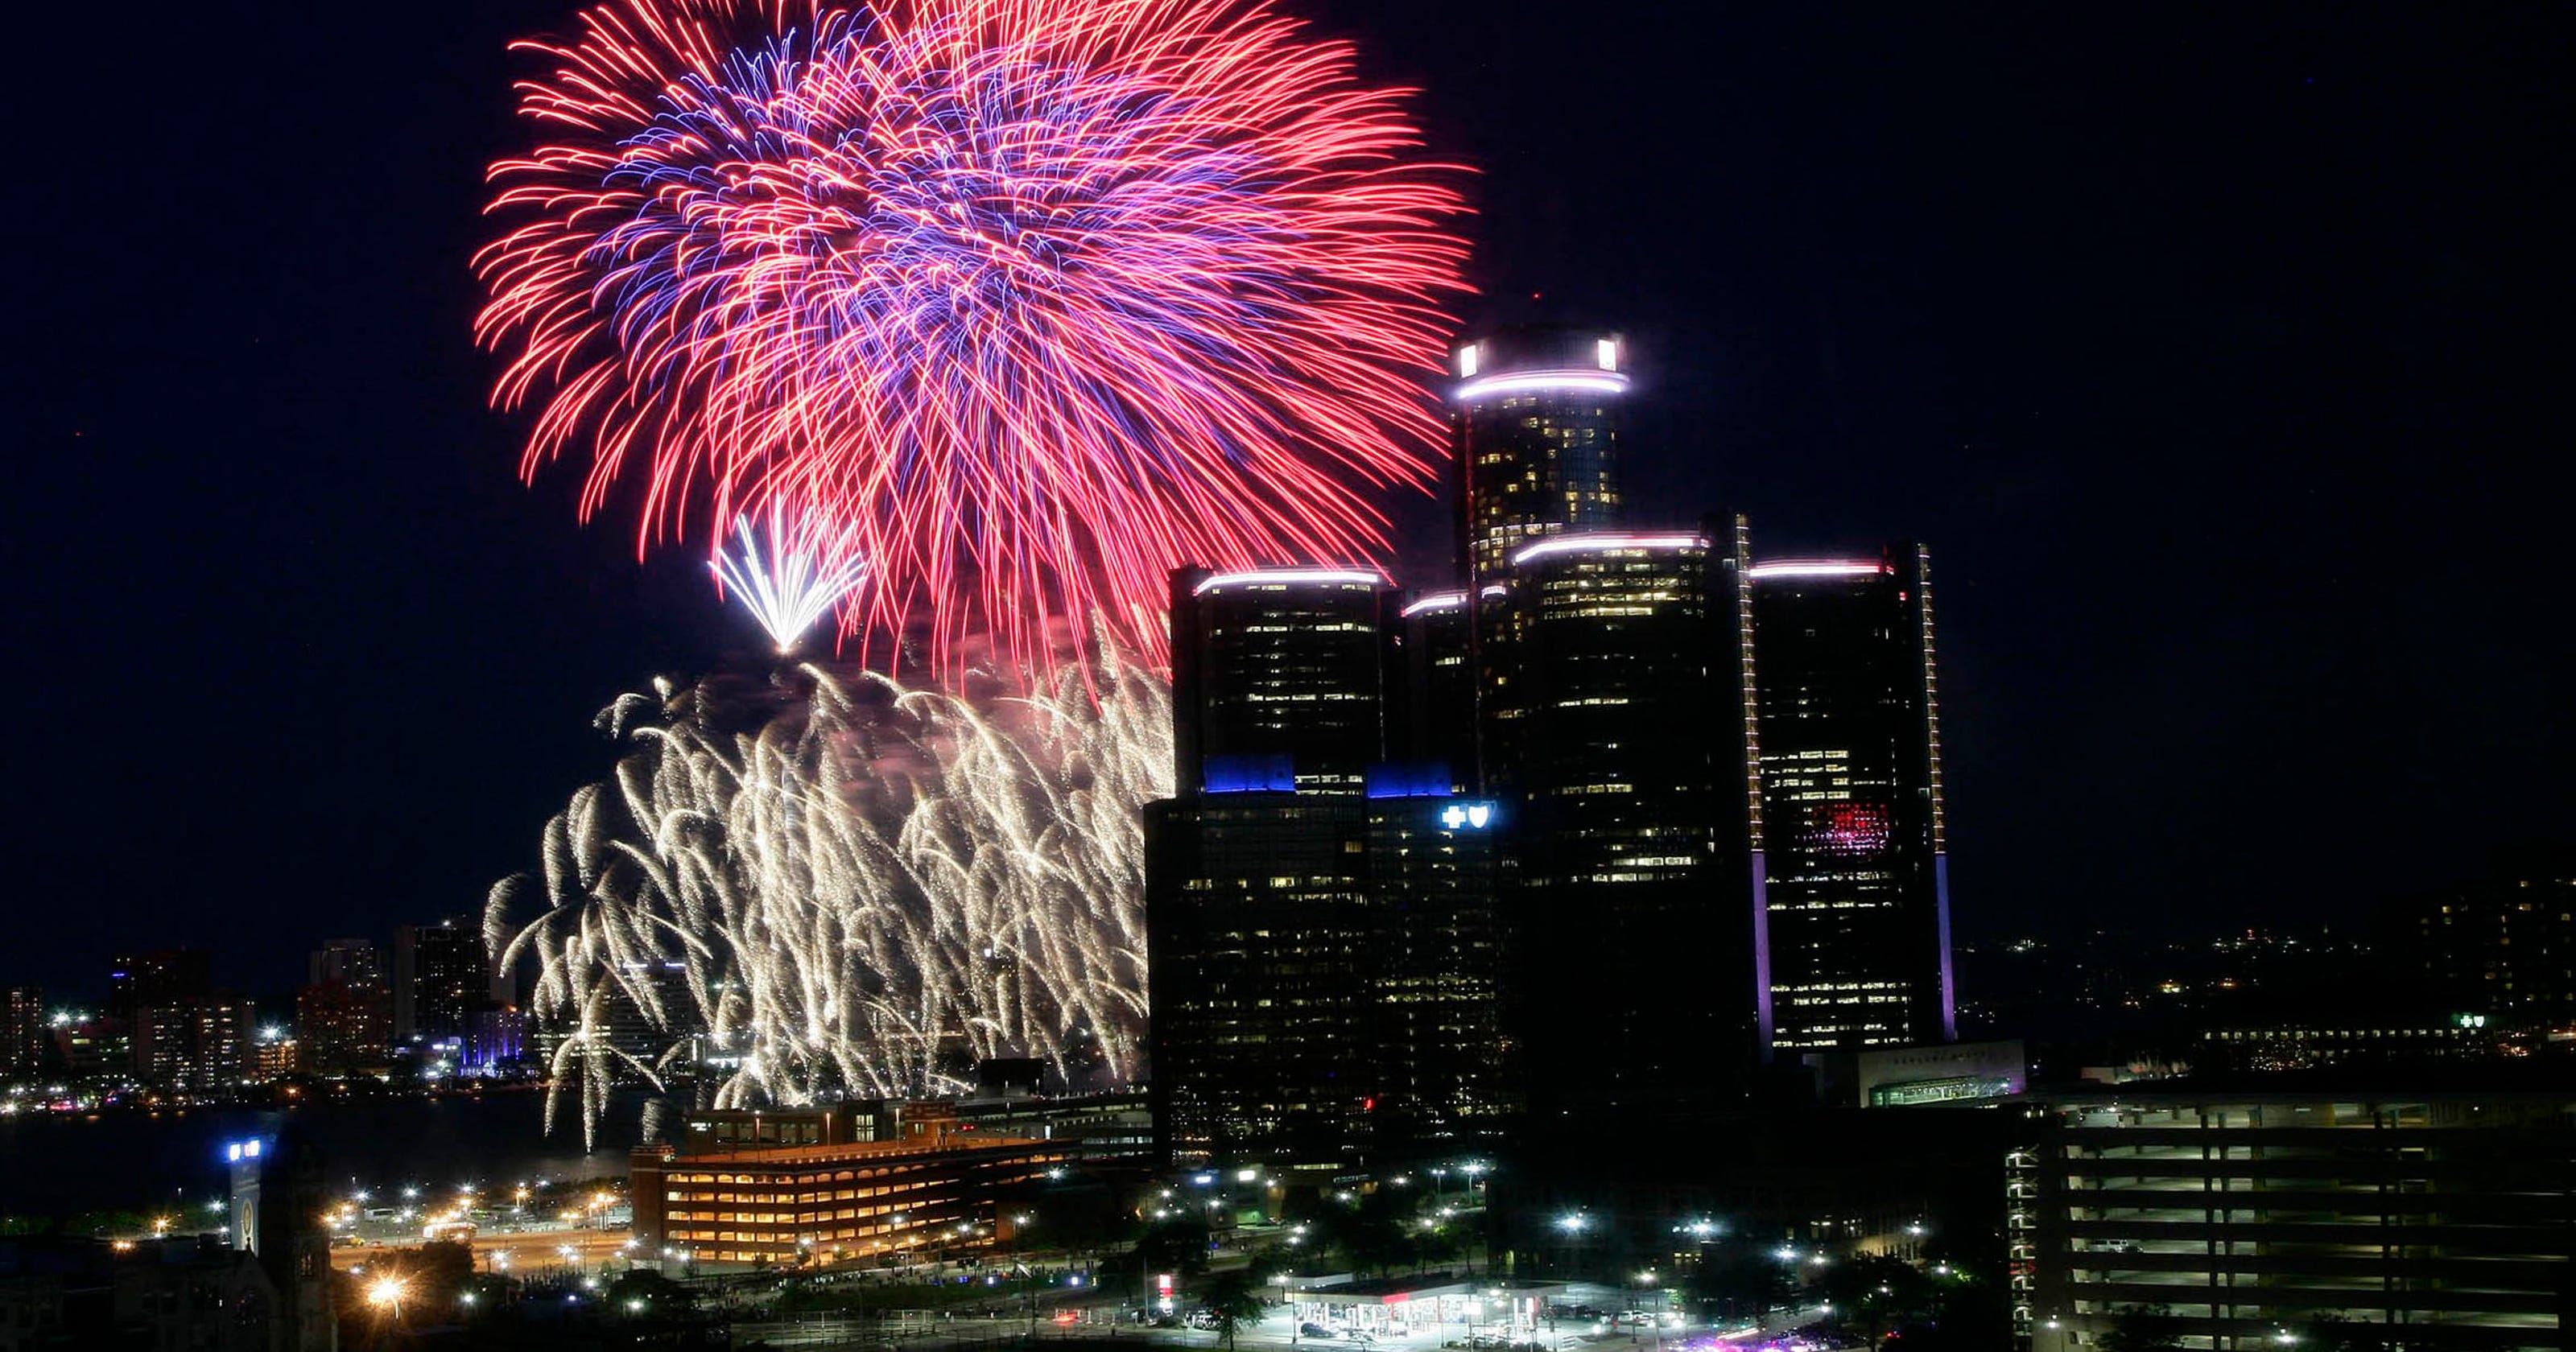 Detroit fireworks 2019 How to watch, parking, what to know